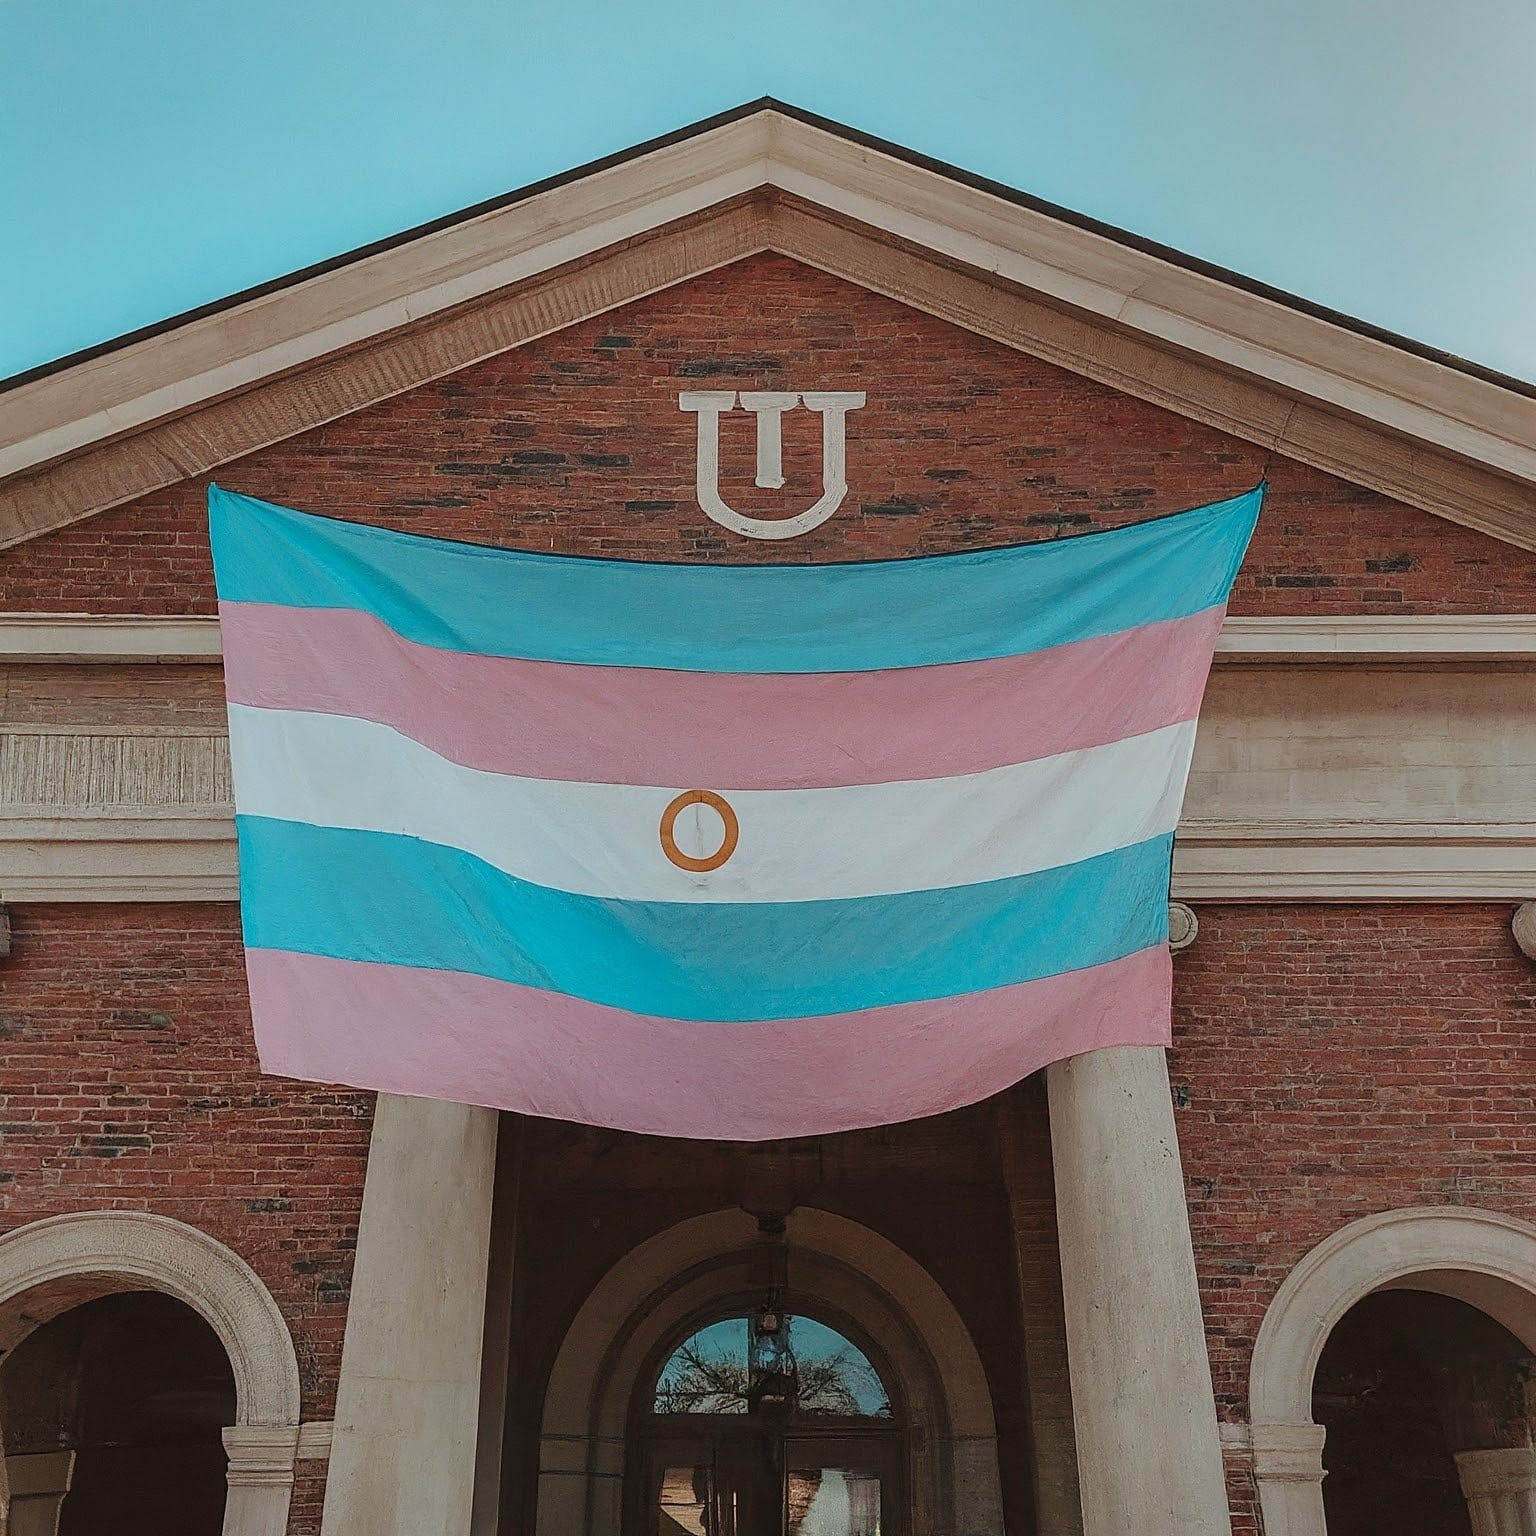 University of Utah approves Trans Flags, but not American flags